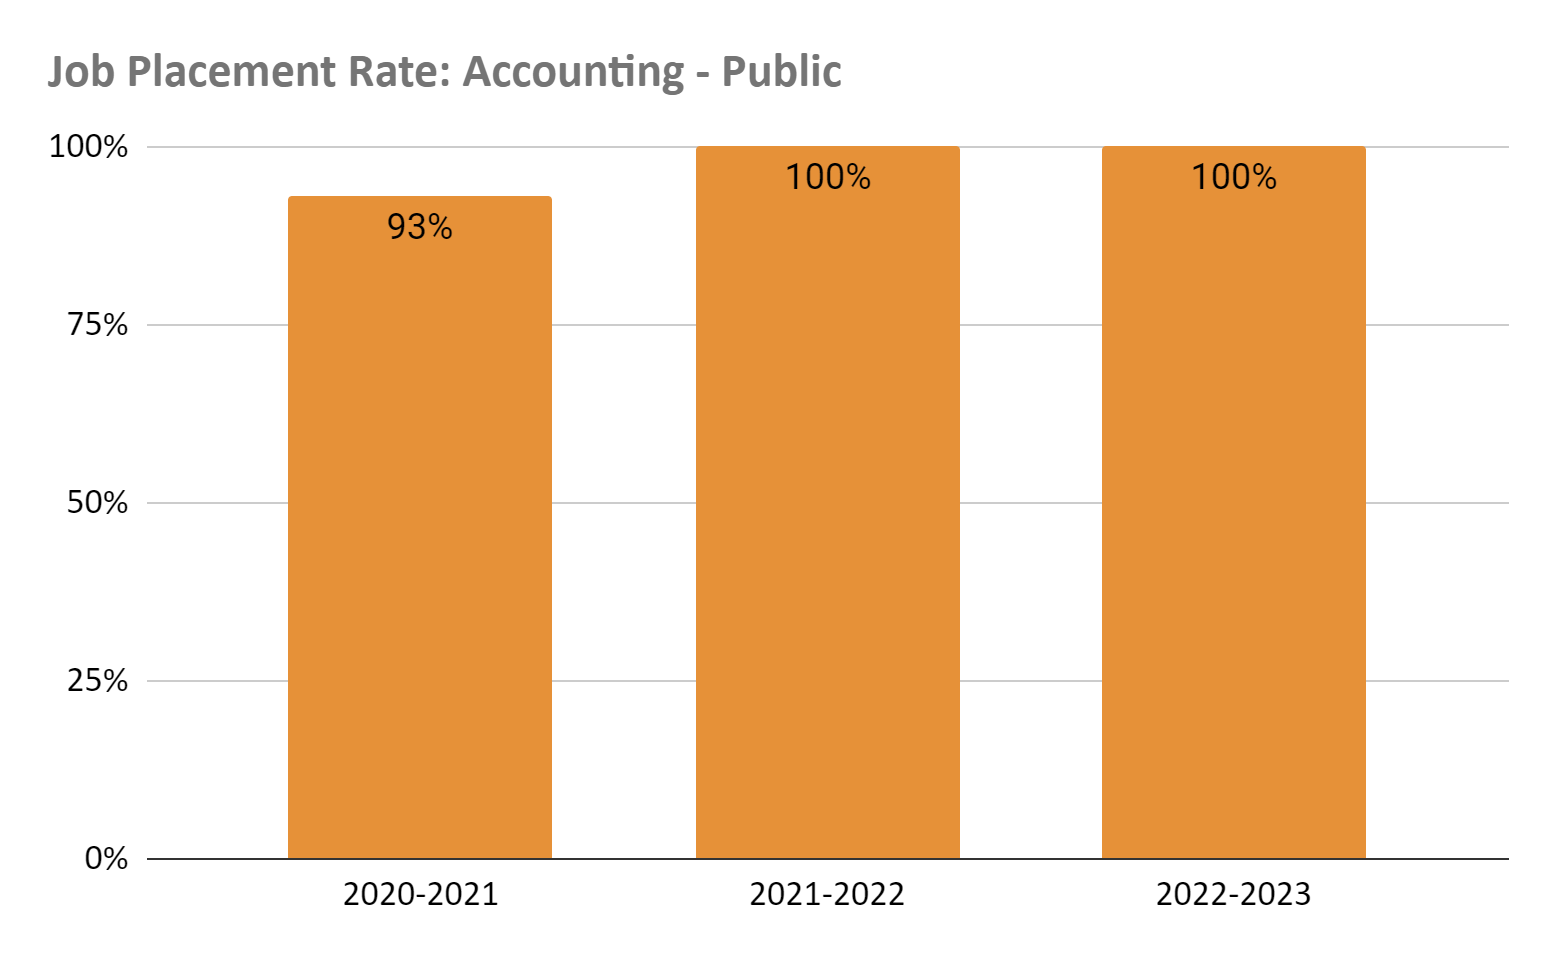 Job Placement Rate - Accounting